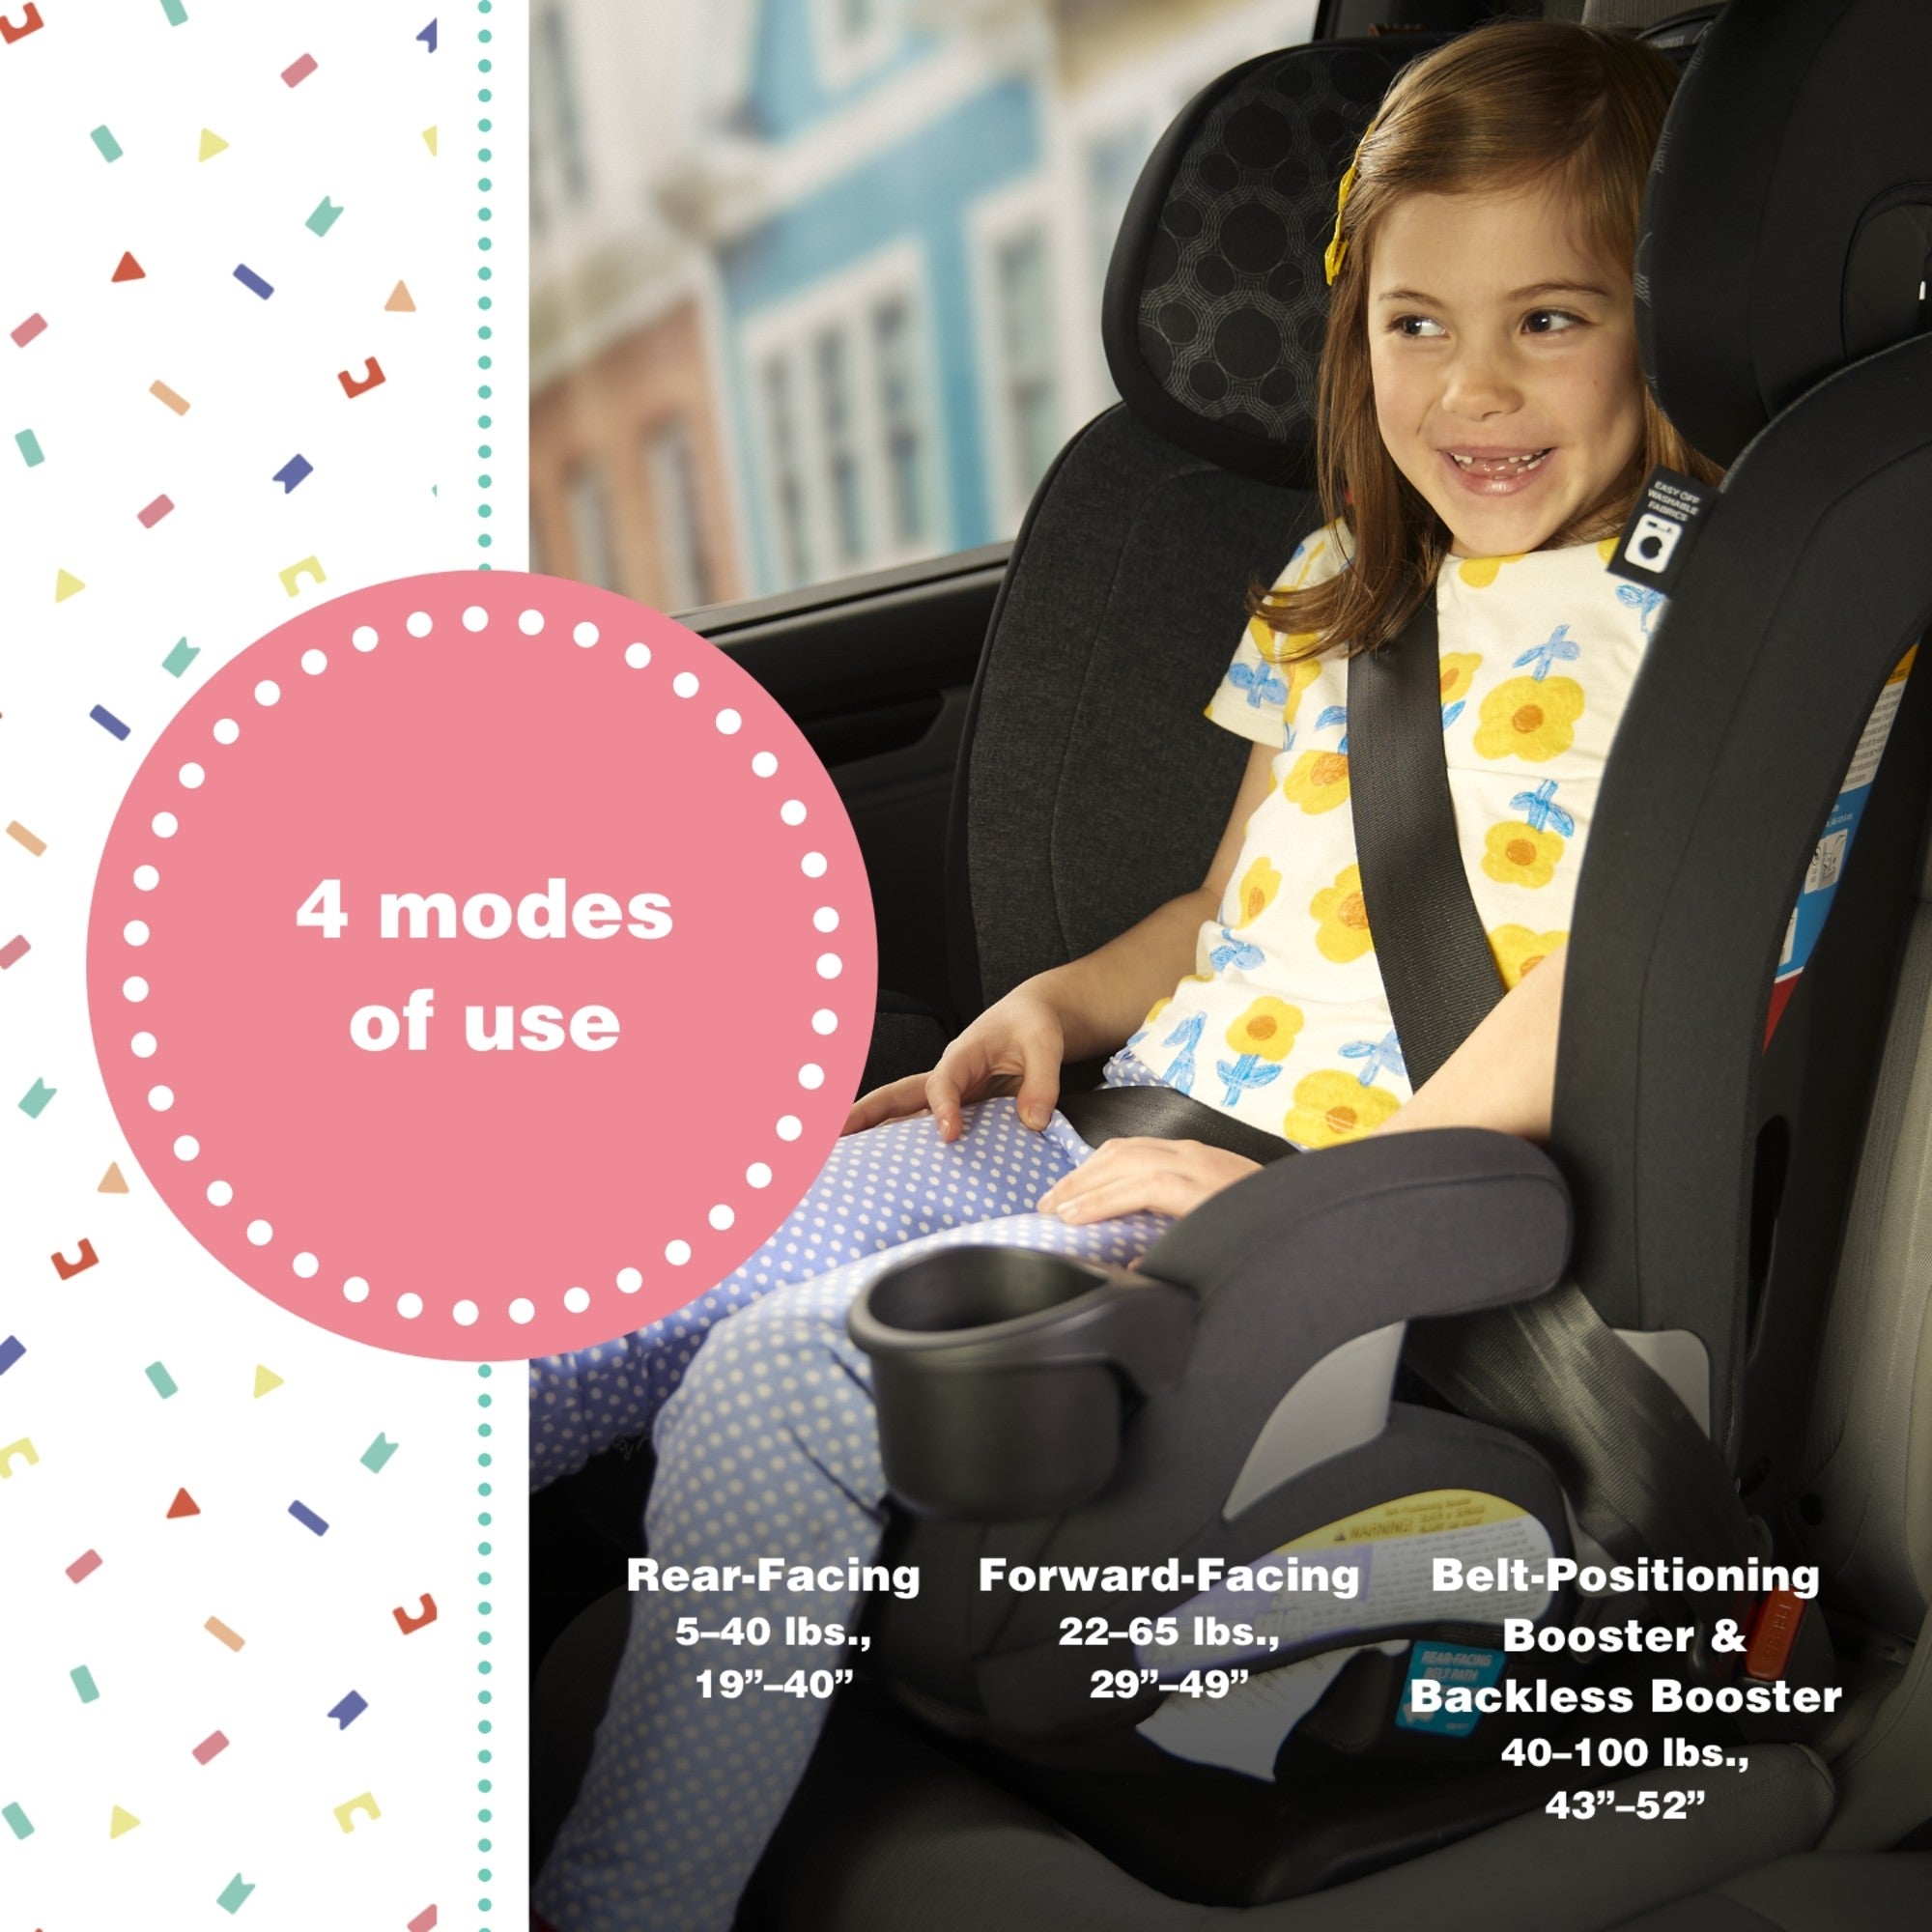 Disney Baby EverSlim All-in-One Convertible Car Seat - 4 modes of use: rear-facing 5-40 lbs., 19"-40"; forward-facing 22-65 lbs., 29"-49"; belt-positioning booster & backless booster 40-100 lbs., 43"-52"